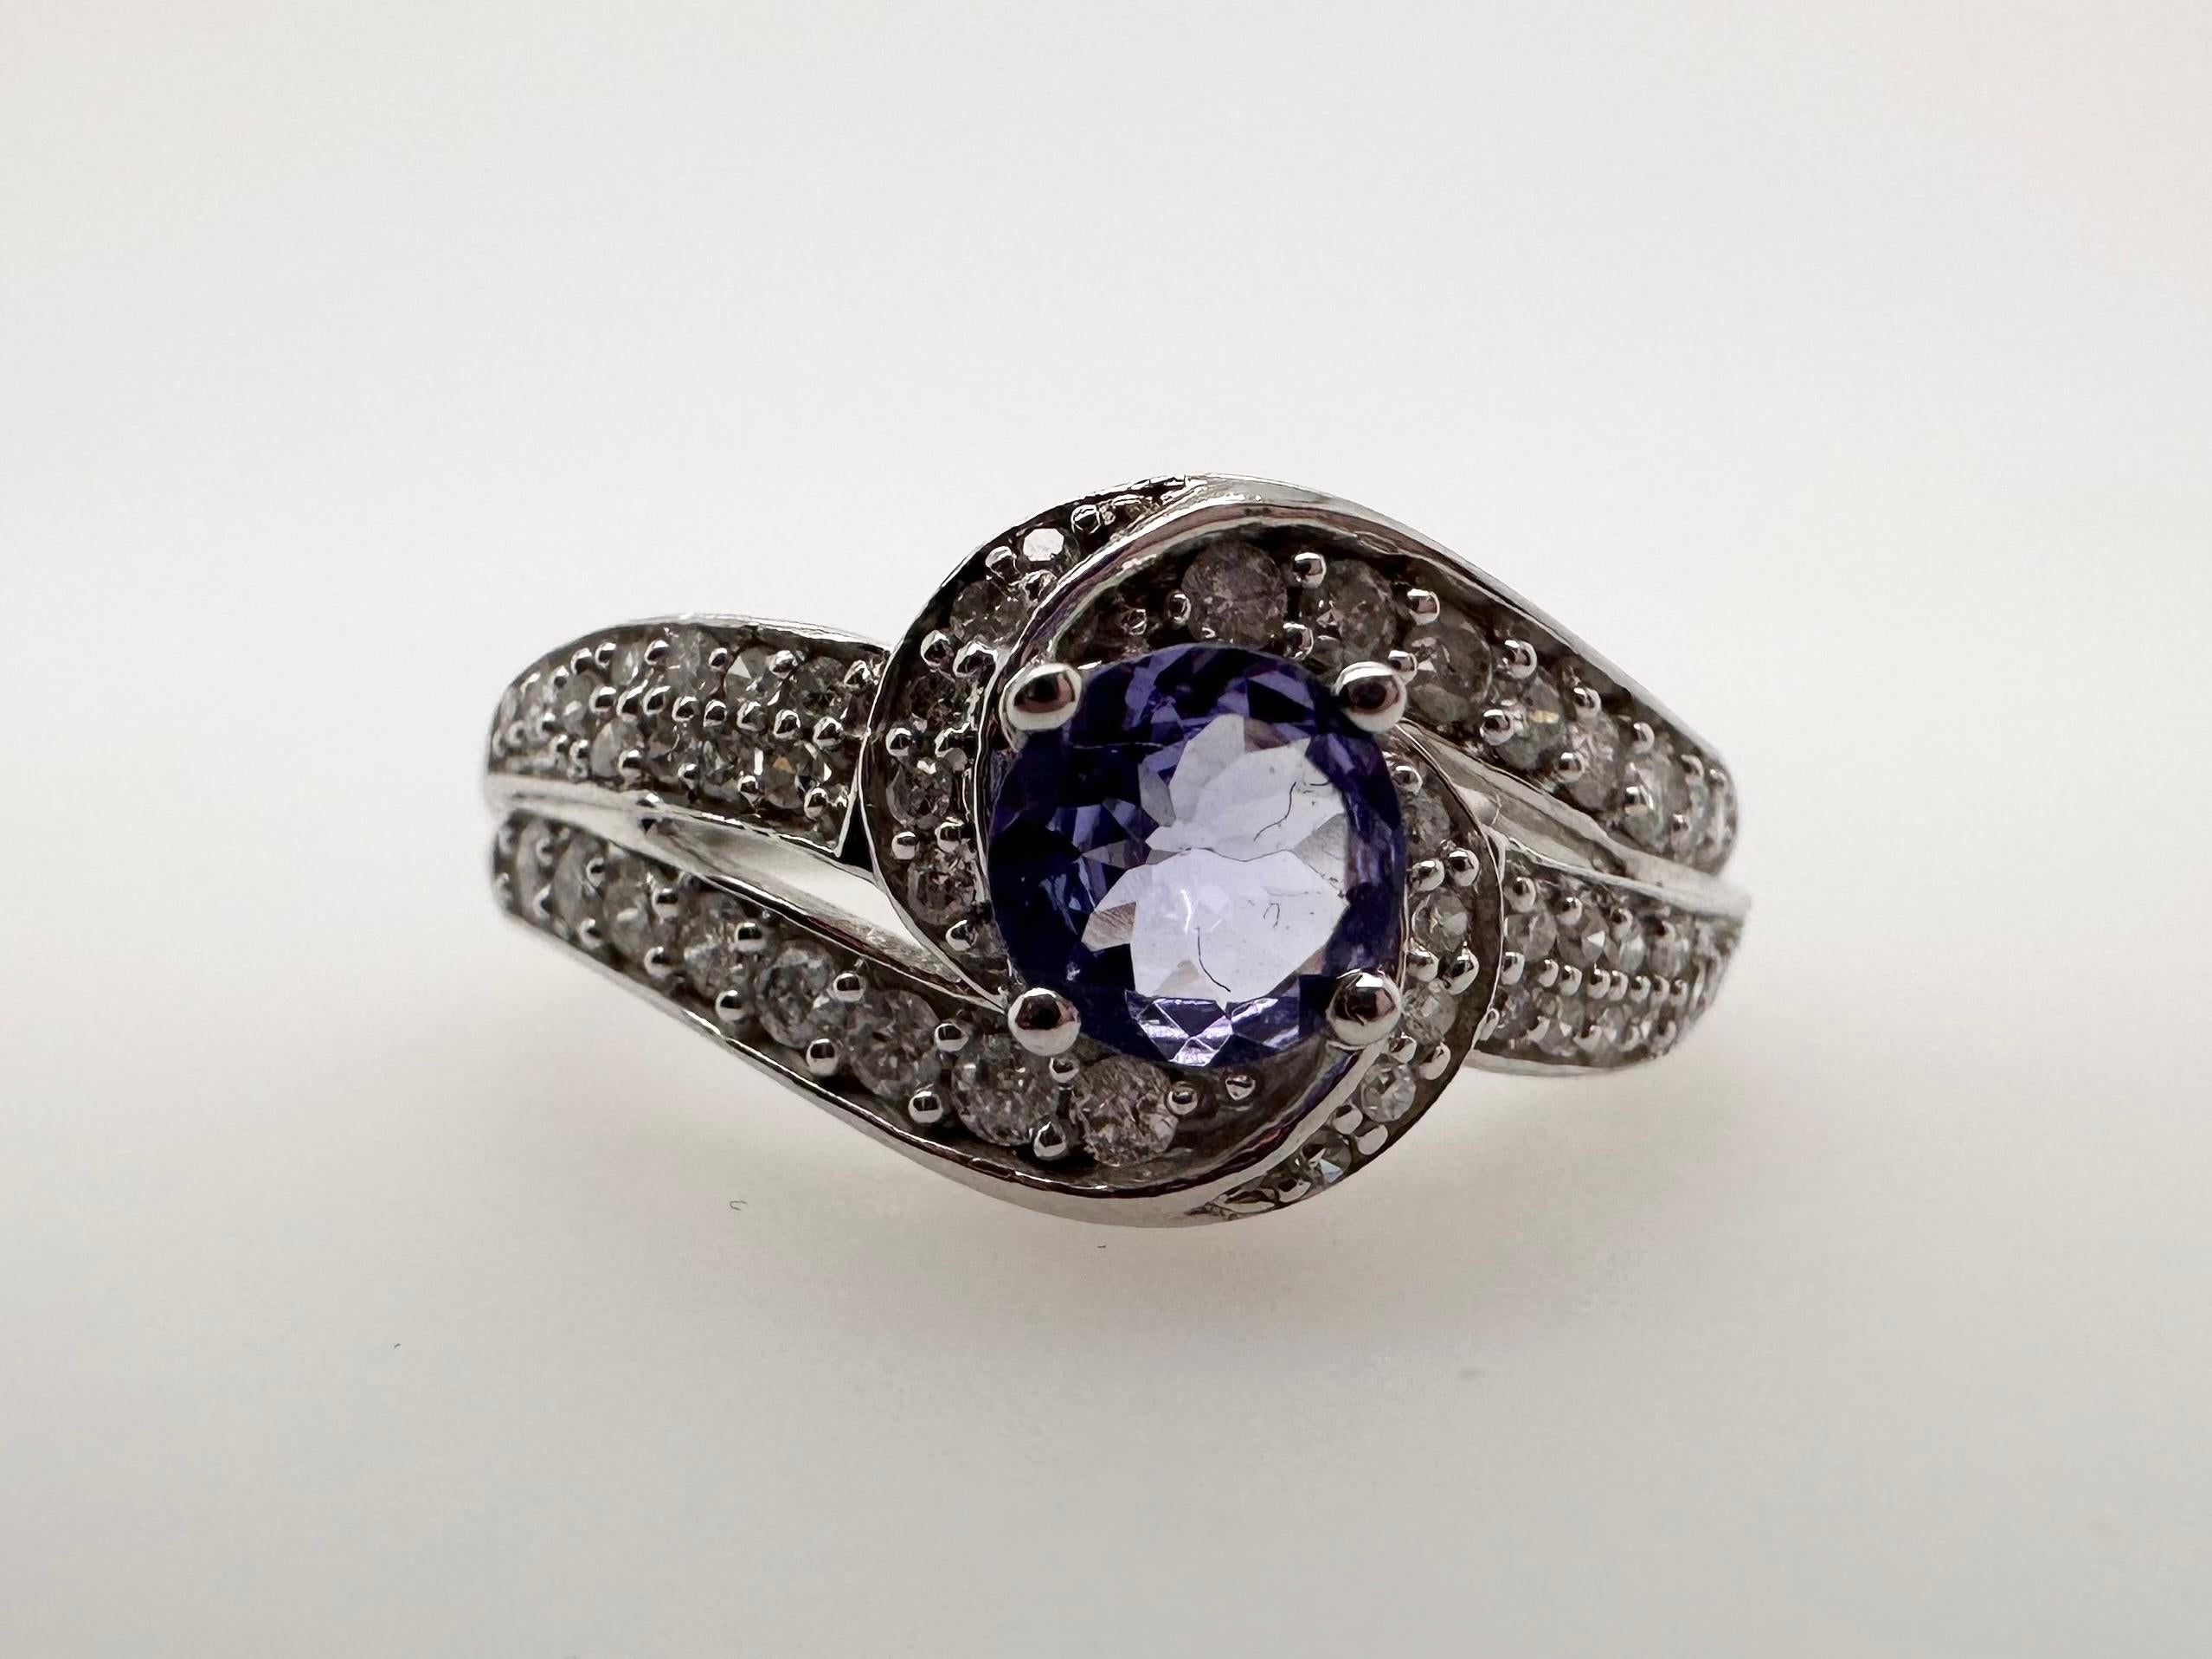 Tanzanite diamond ring infinity style ring in 10KT gold.

Metal Type: 10KT

Natural Tanzanite(s):
Color: Violet
Cut:Round
Carat: 0.60ct
Clarity: Slightly Included

Natural Diamond(s): 
Color: G-H
Cut:Round Brilliant
Carat: 0.65ct
Clarity: SI